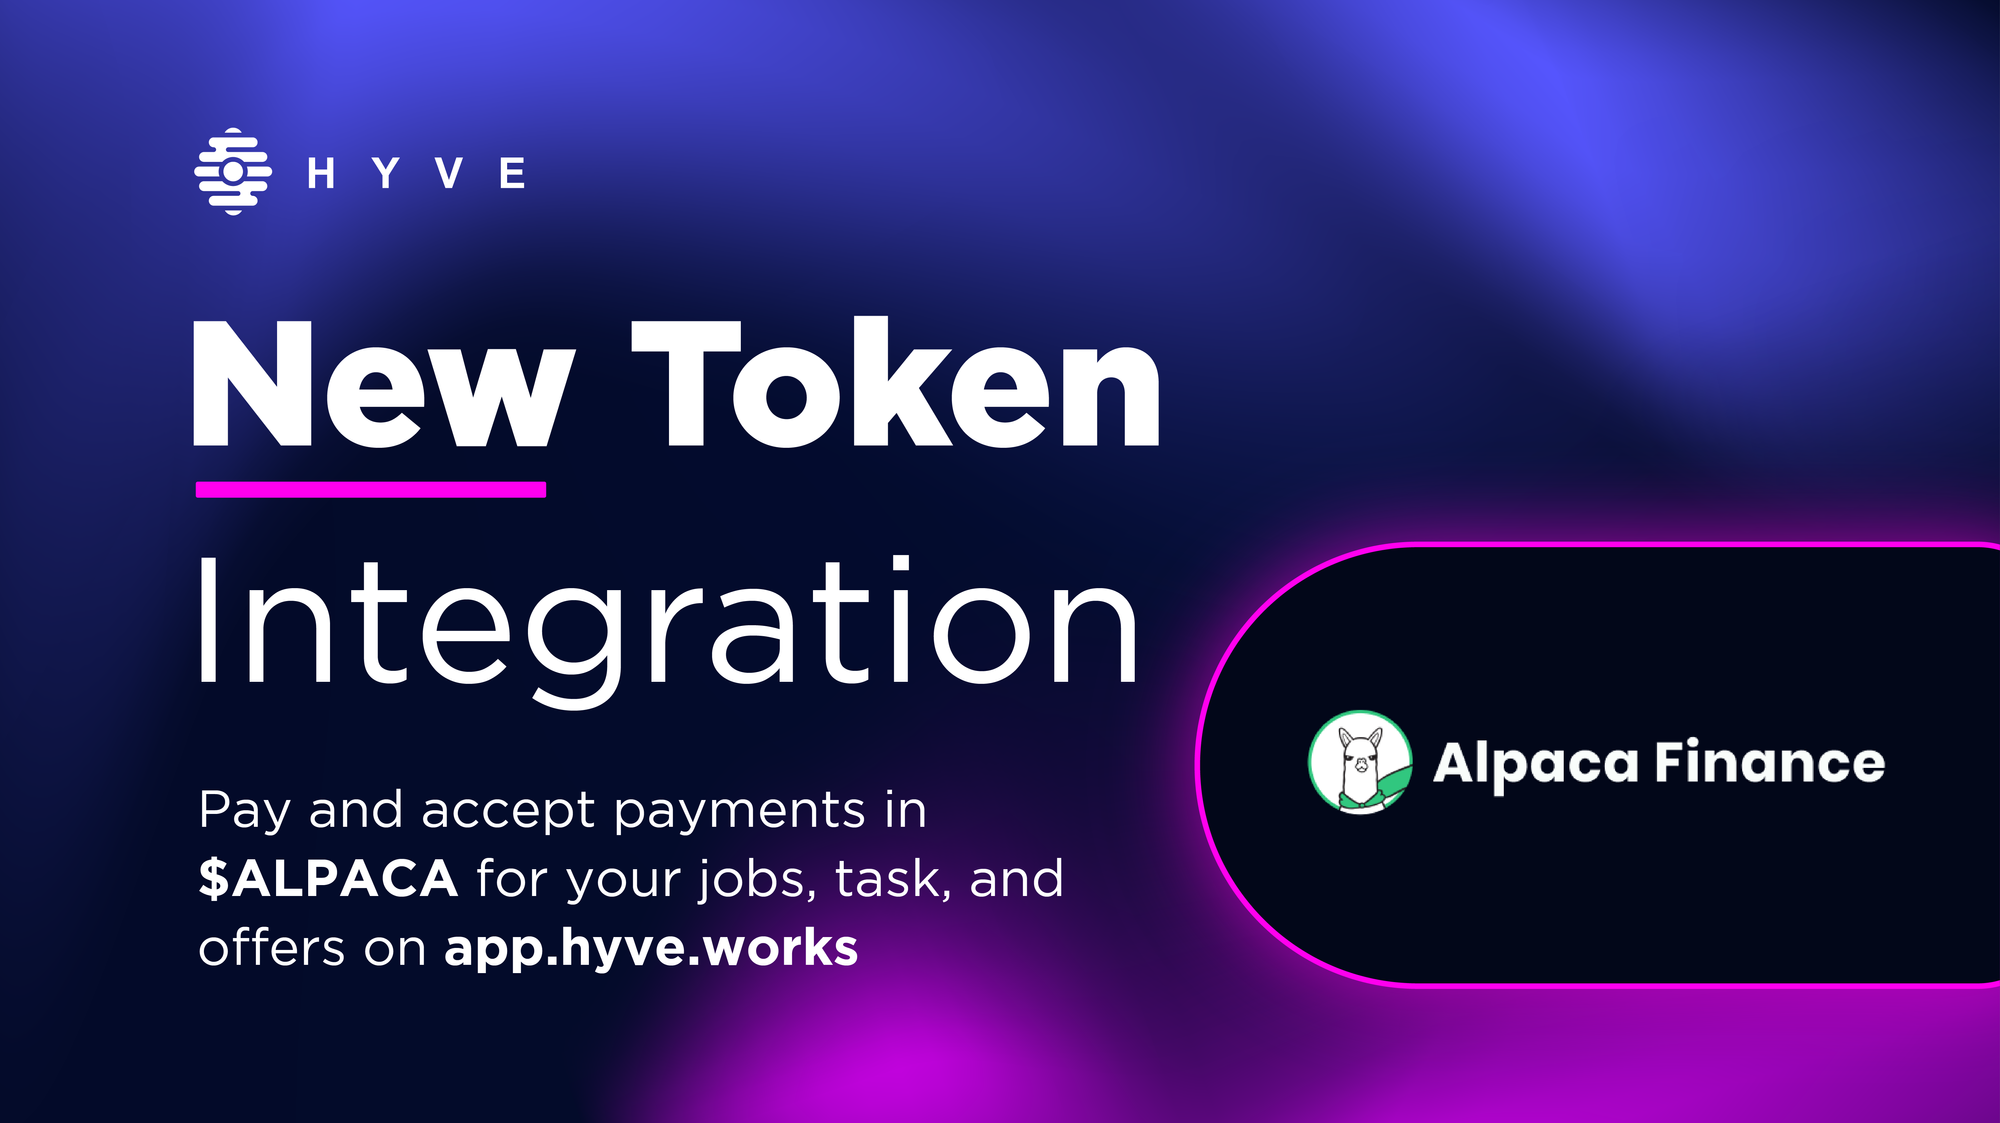 New token integration: $ALPACA is now available on HYVE